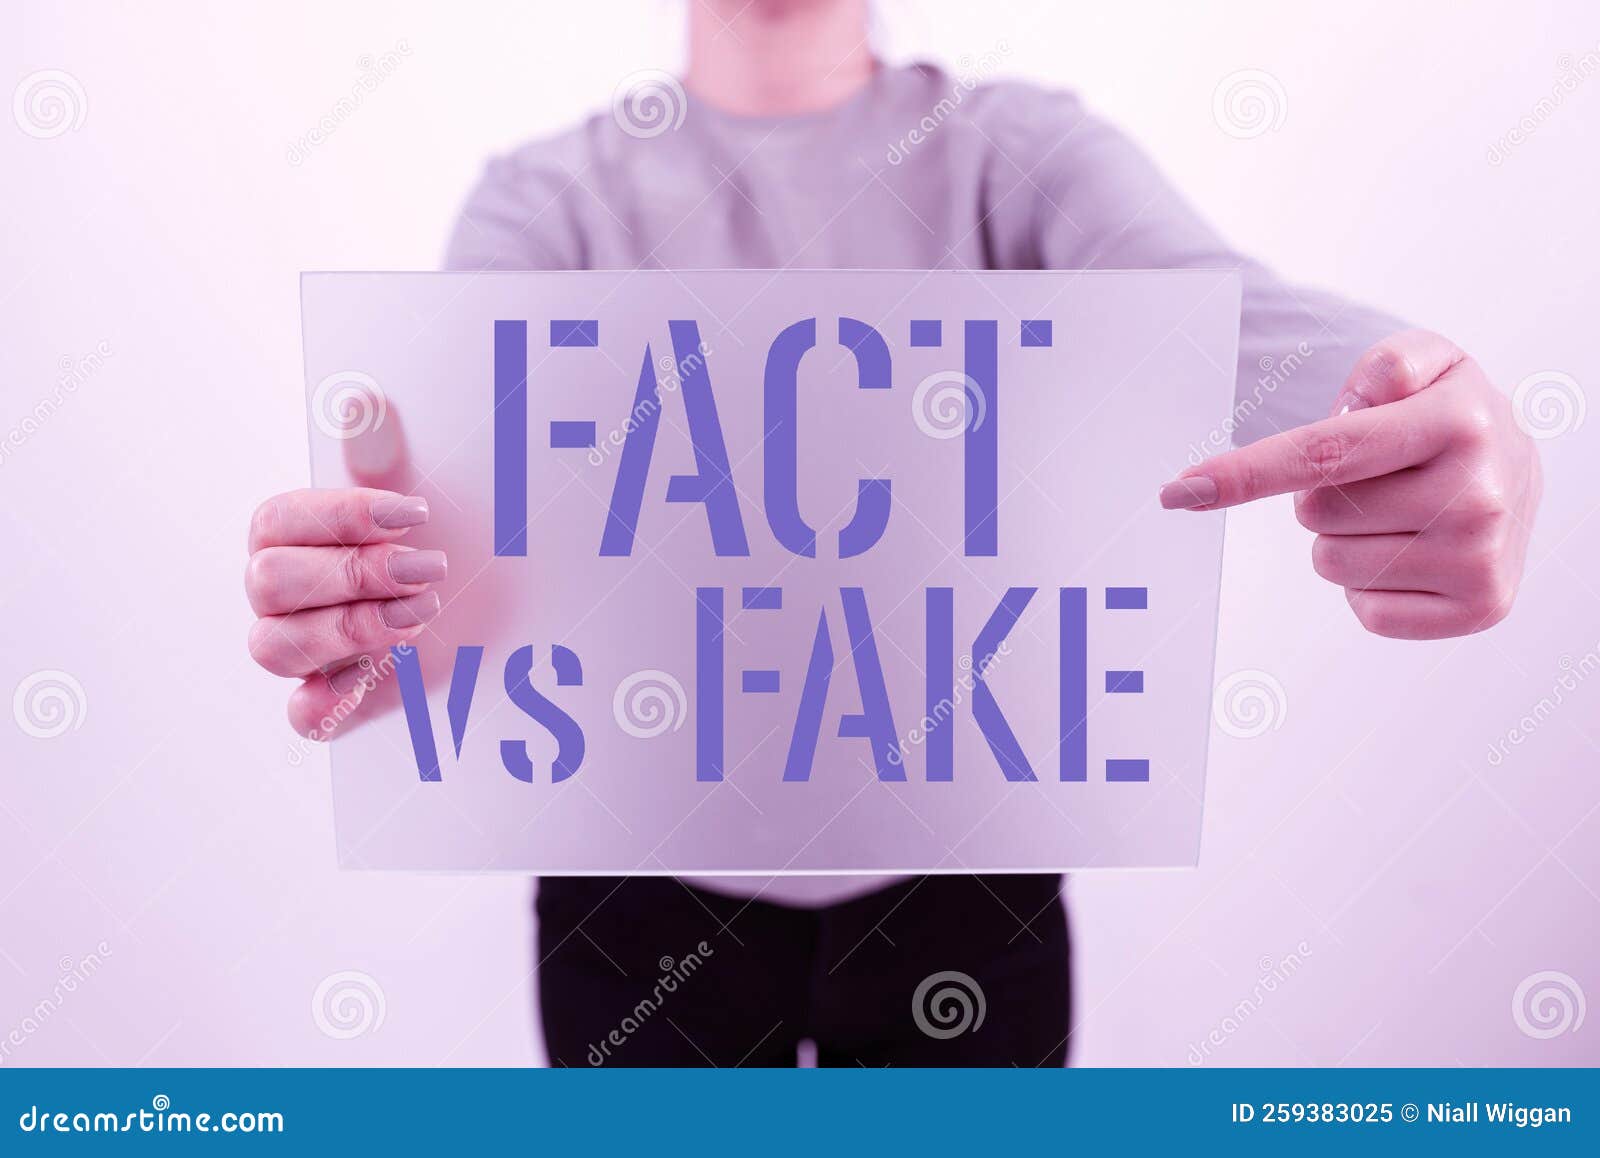 handwriting text fact vs fake. business idea rivalry or products or information originaly made or imitation